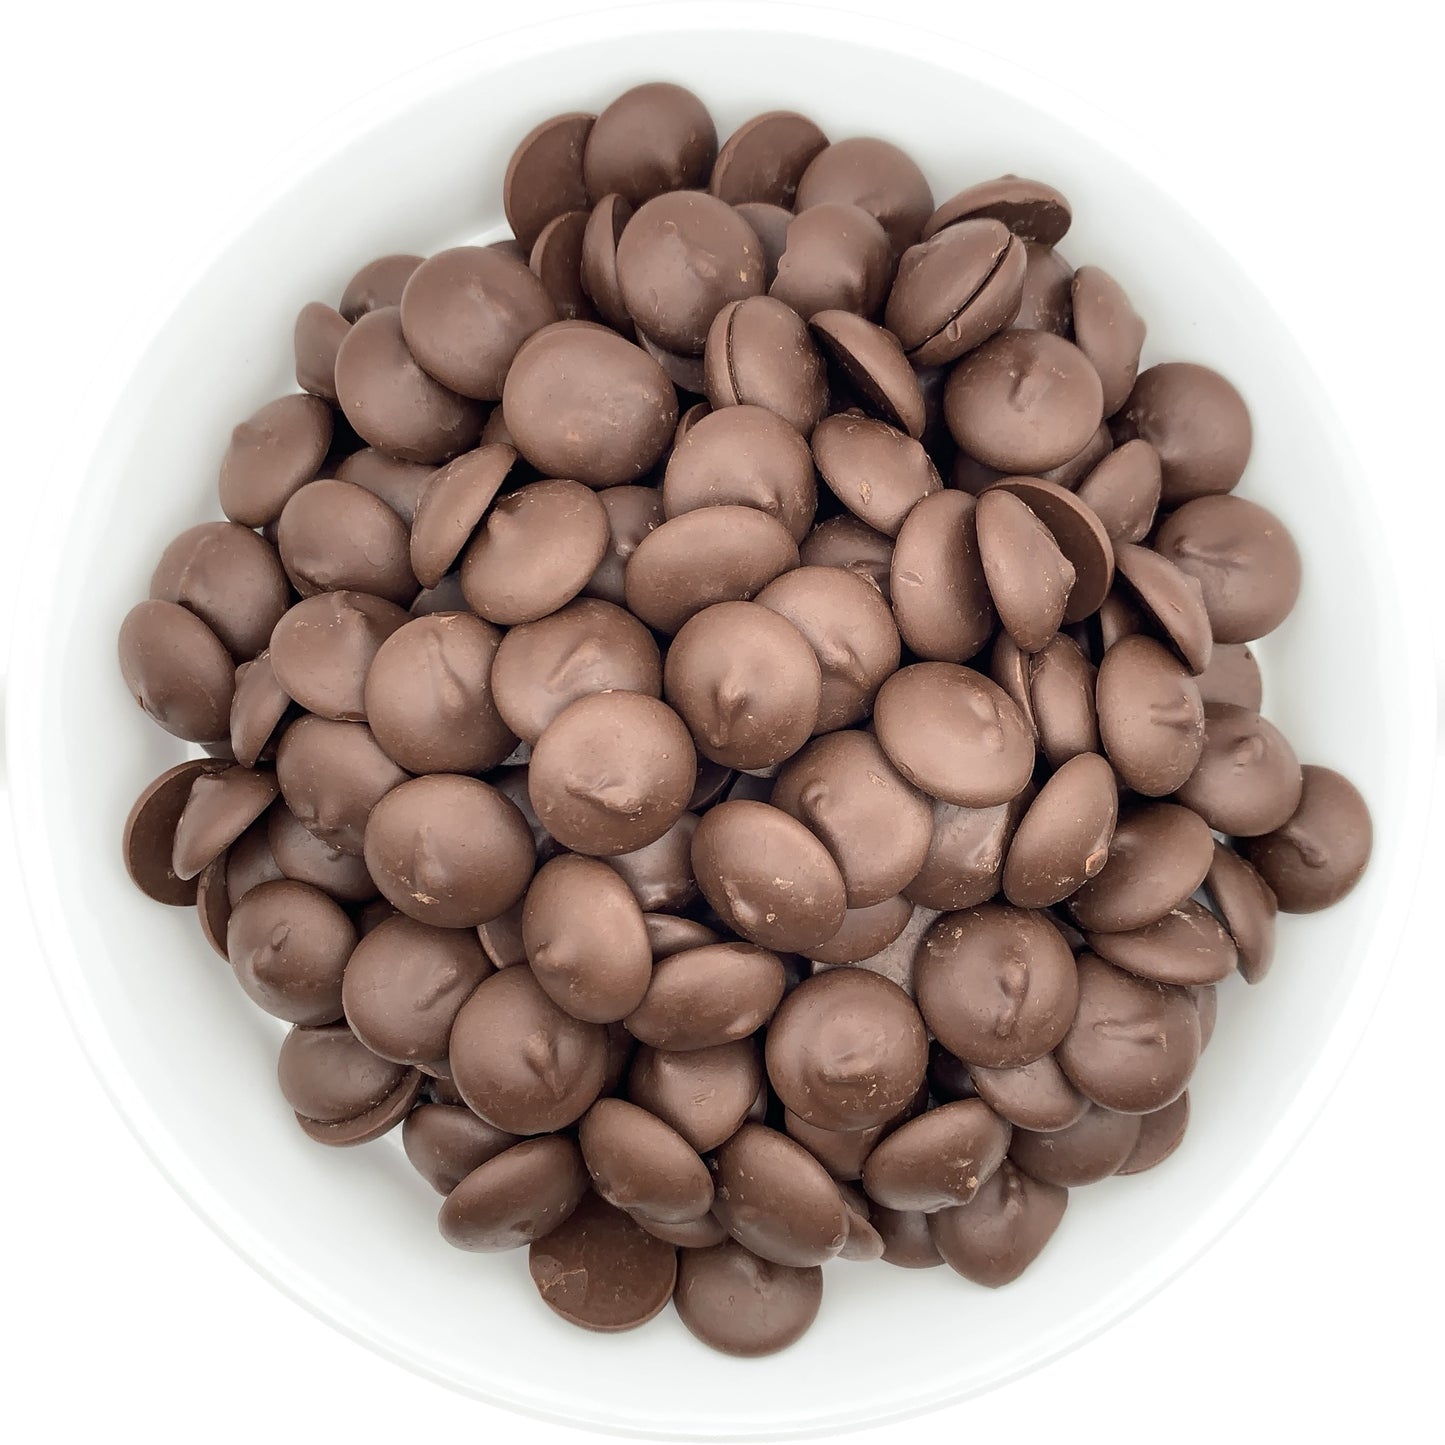 Peter's Eastchester Dark Chocolate Confectionery Melting Wafers in a white bowl, capturing the elegant, dark chocolate sheen ideal for rich dessert creations and chocolate fountains.